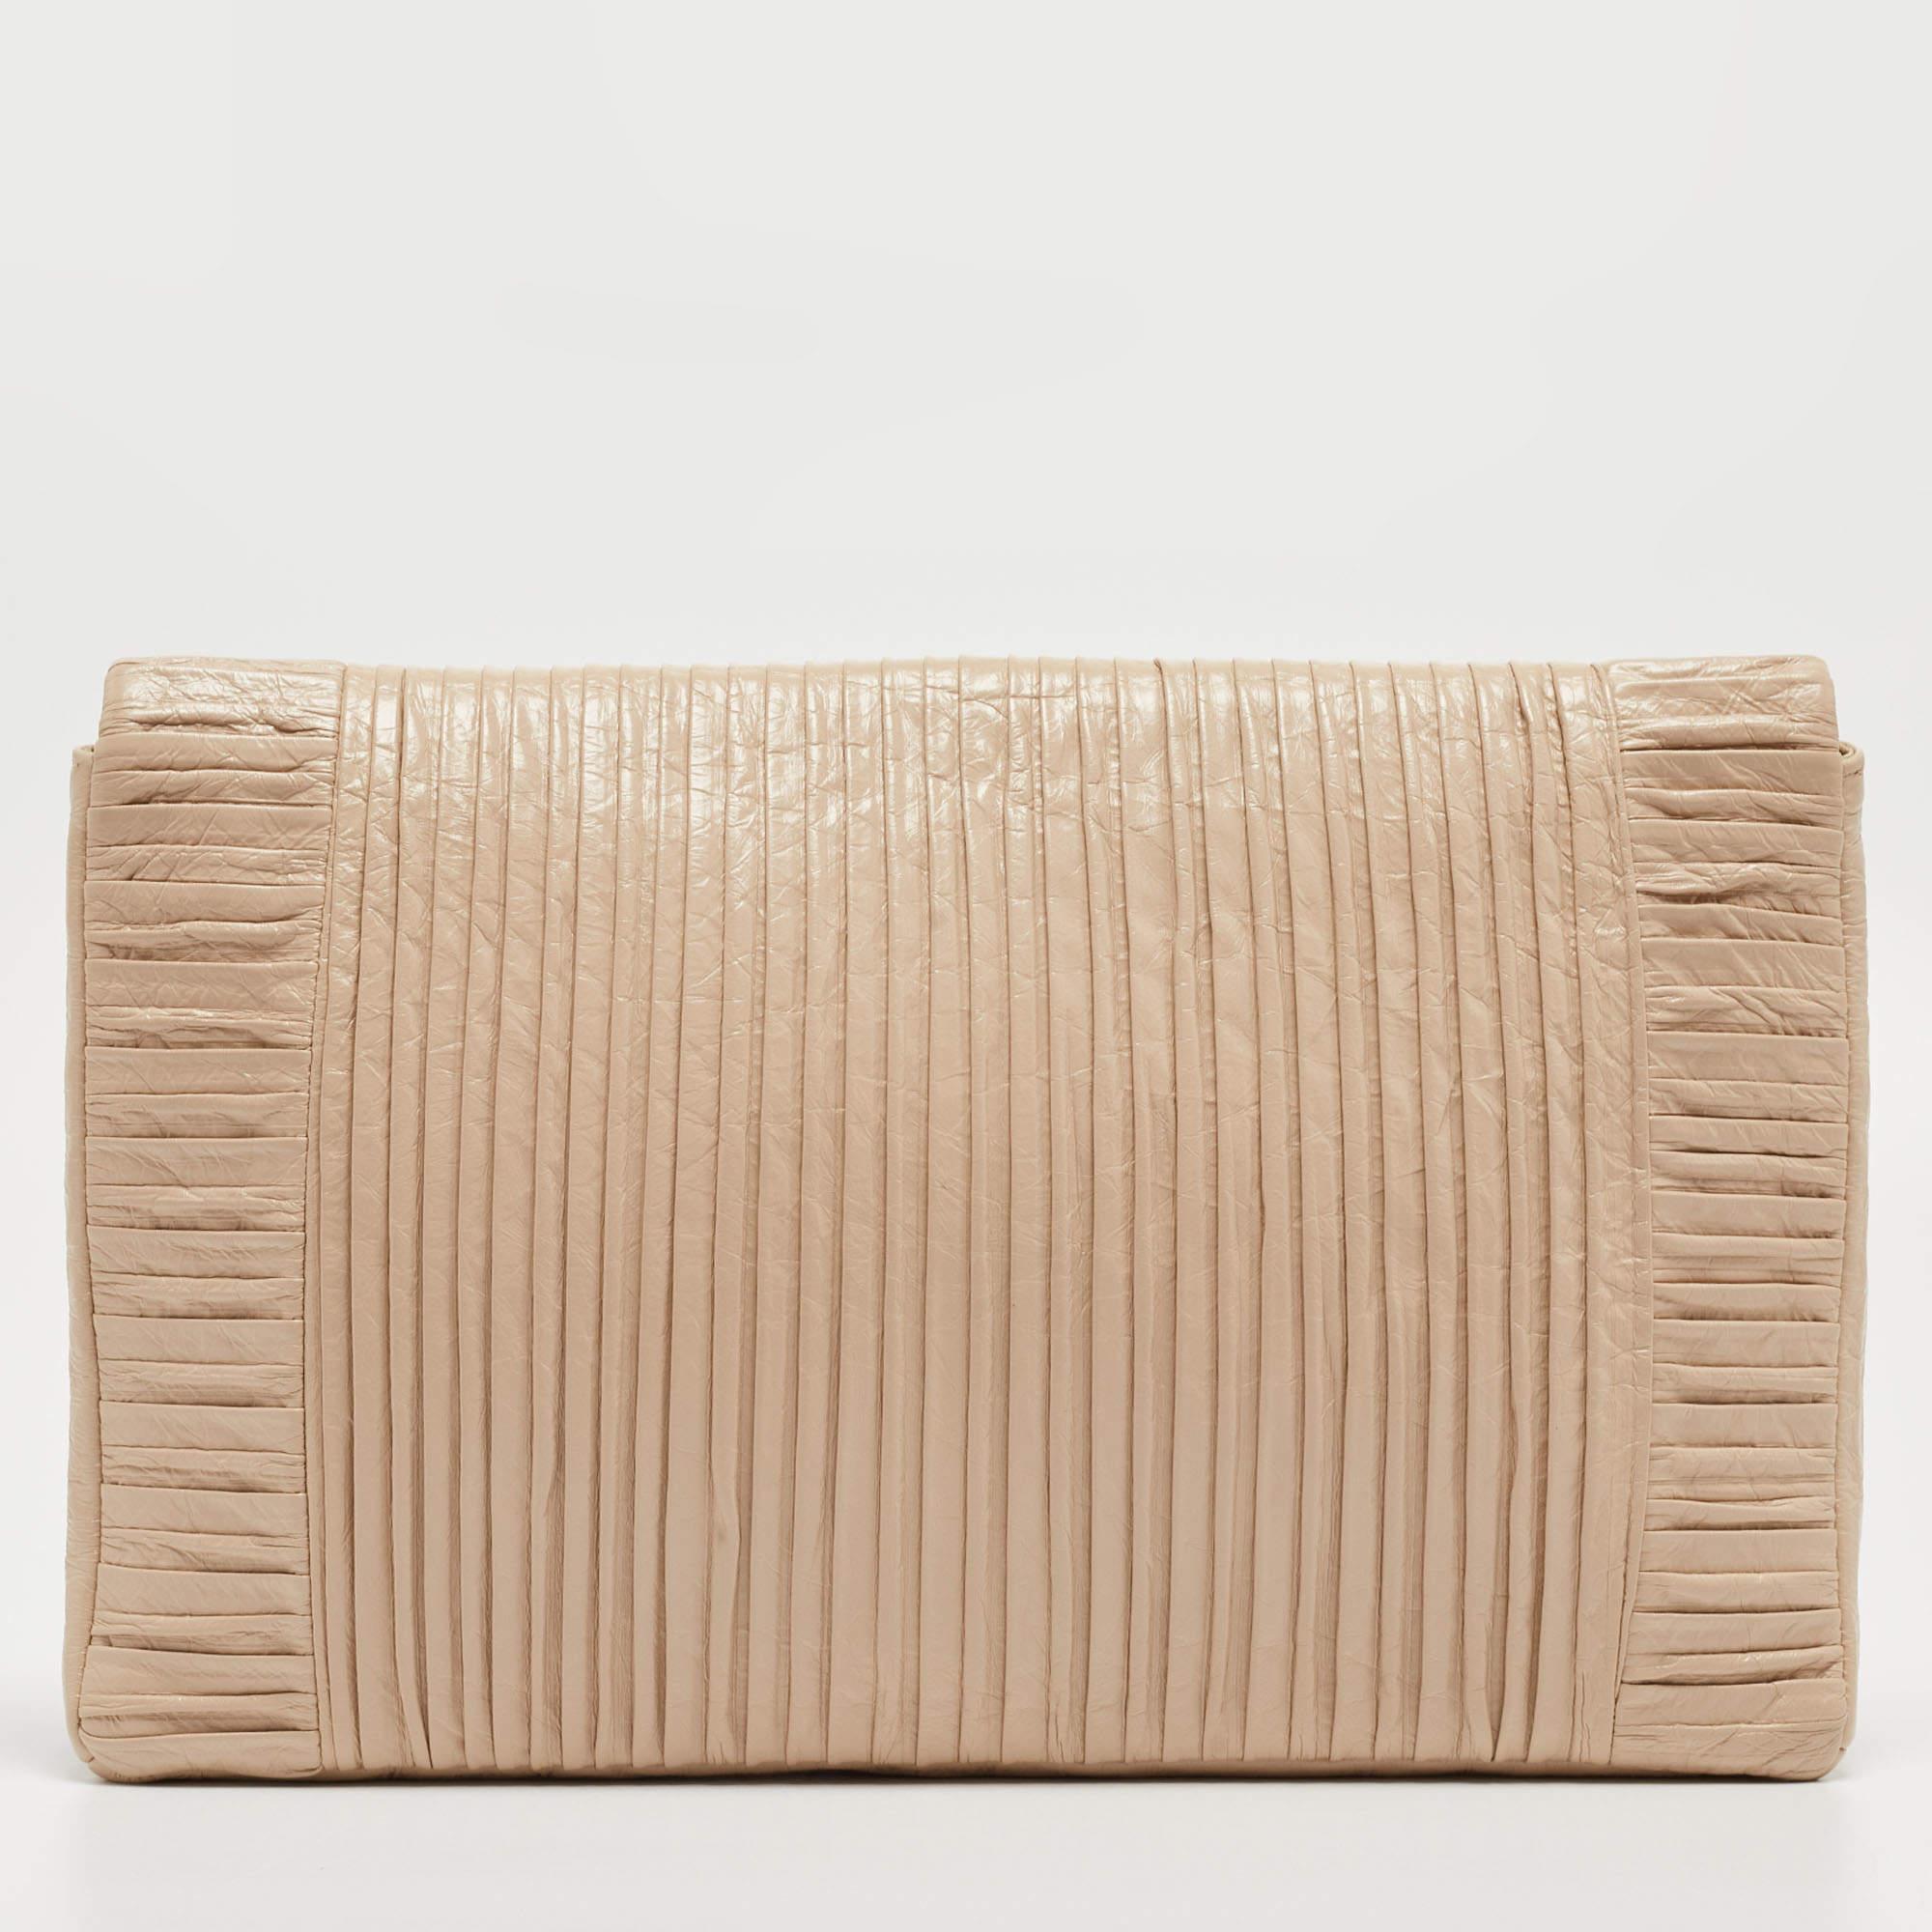 Functional and fashionable, this clutch is a classy styling choice. It is crafted from quality materials, and its lined interior will keep your evening essentials in a neat way.

Includes: Original Dustbag, Authenticity Card